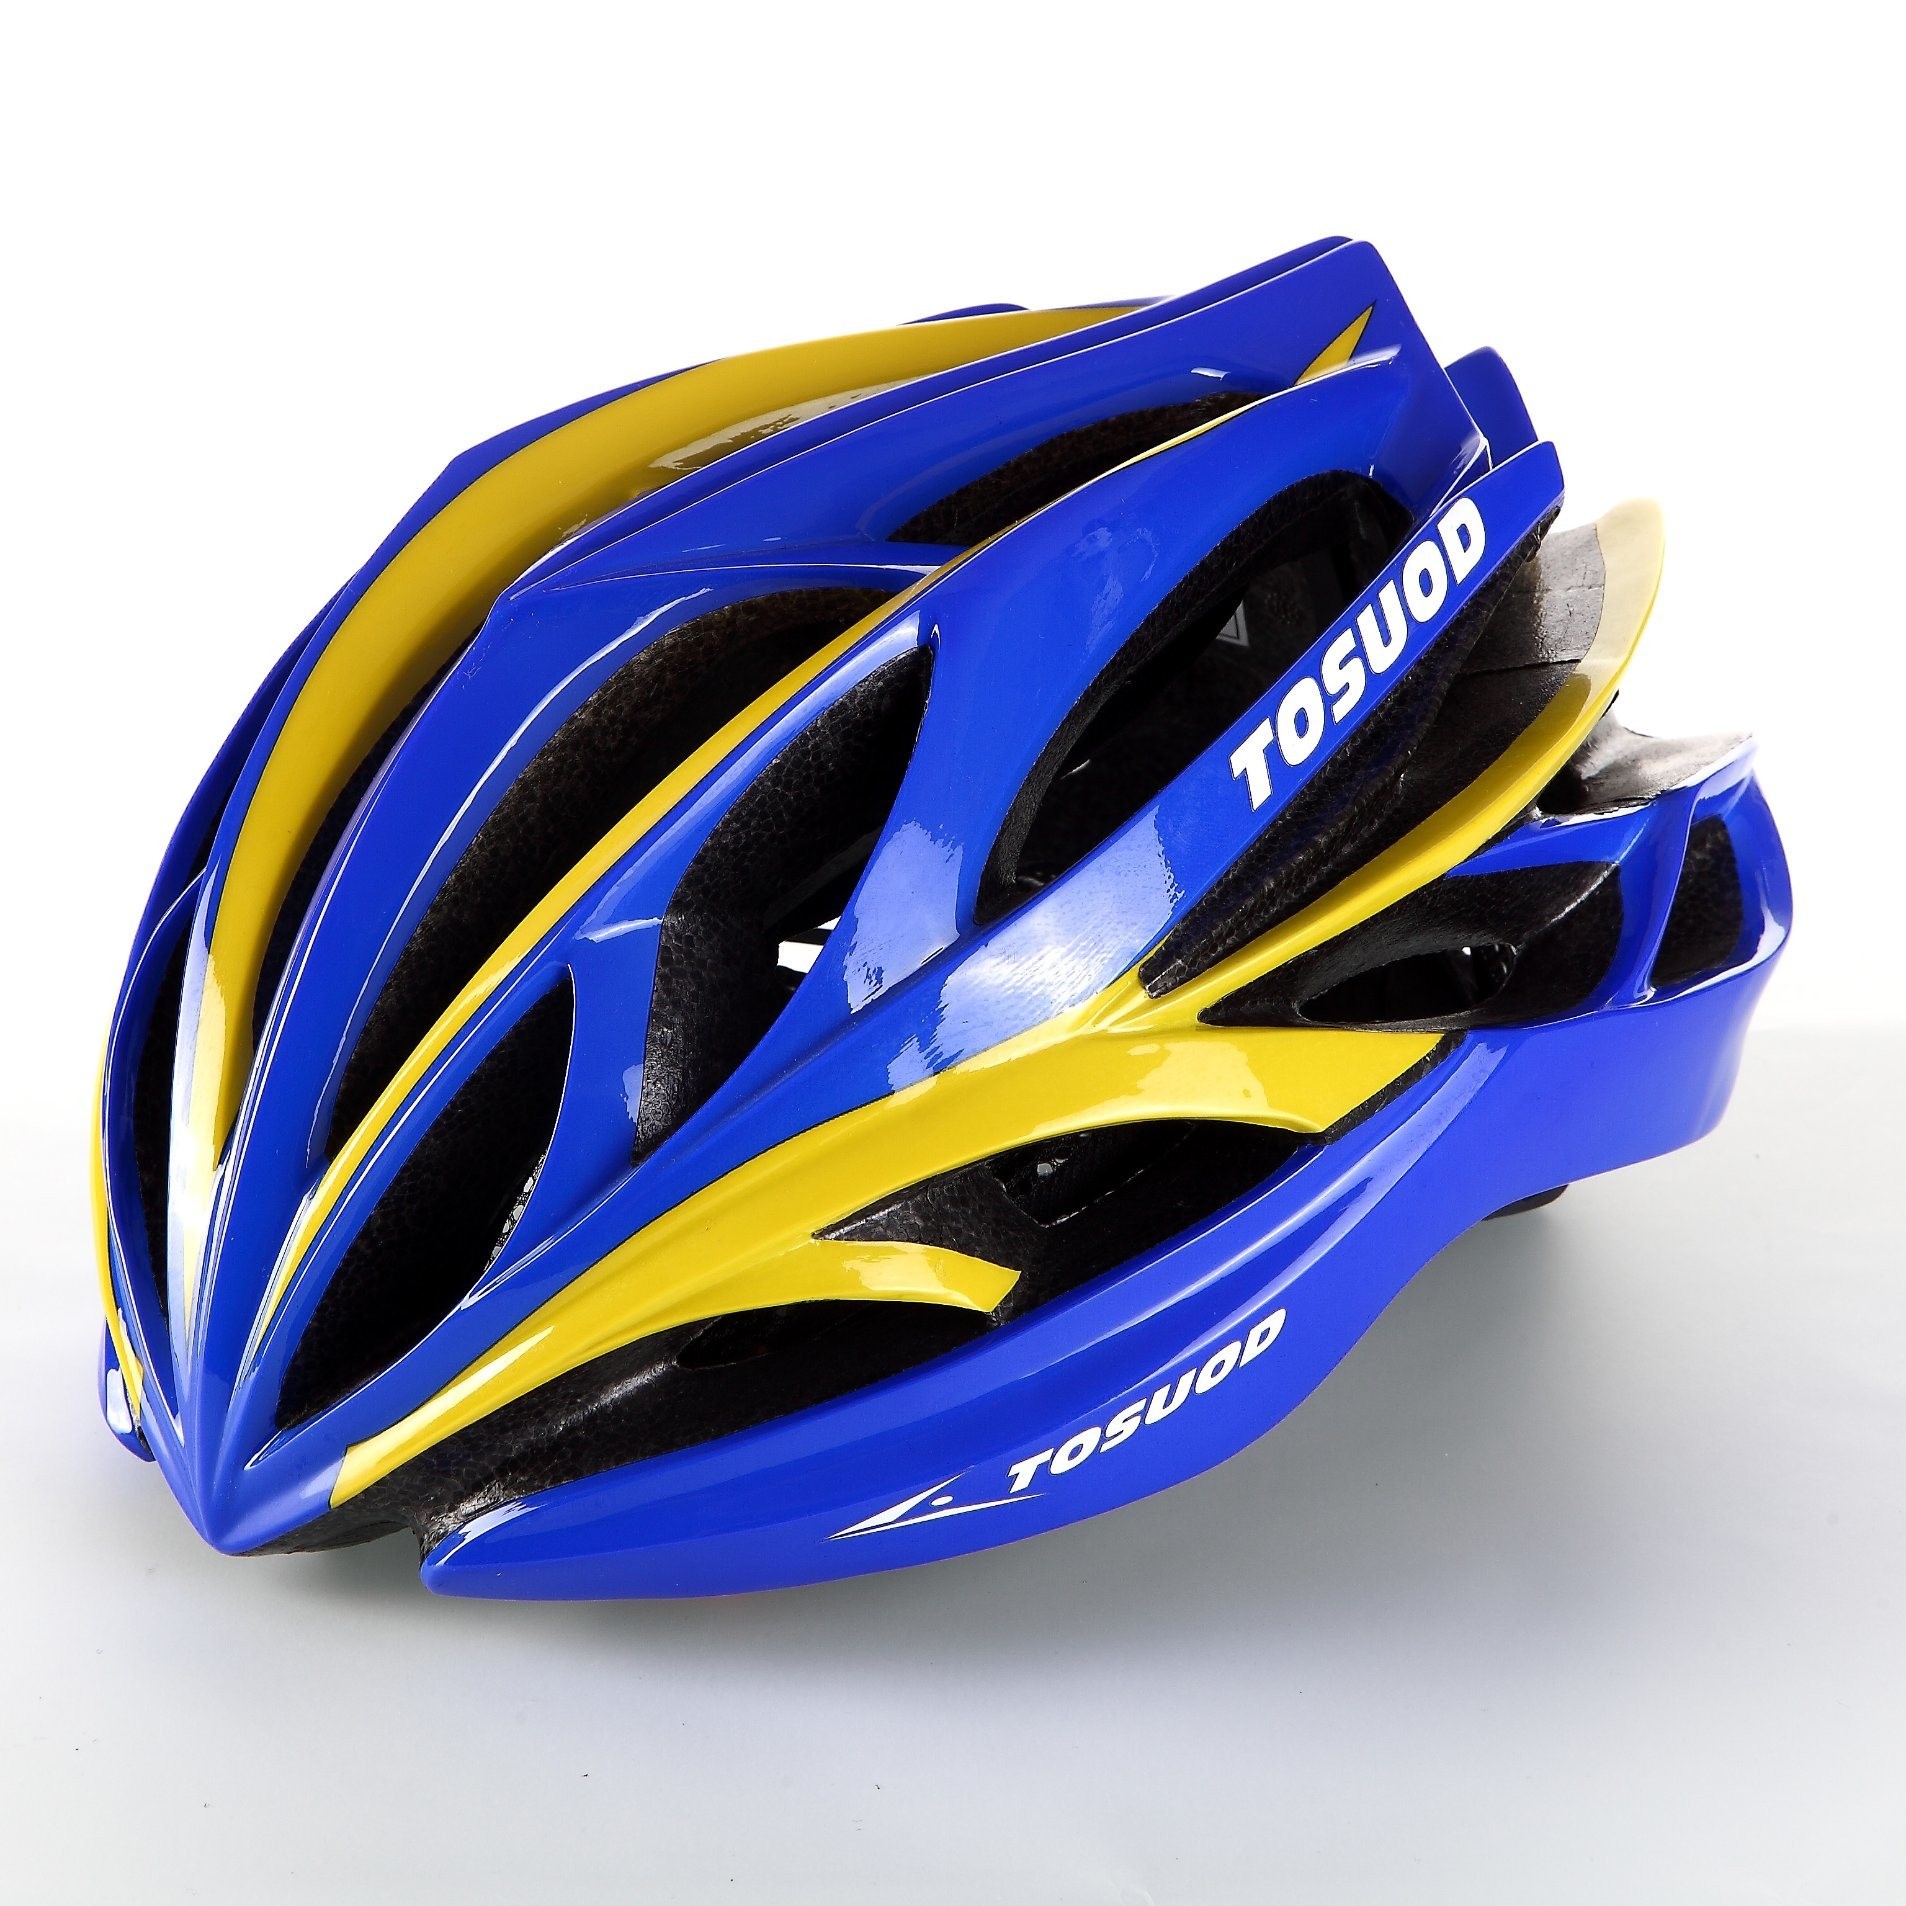 in Mold Bicycle Helmet for Adult, Cycling Bike Helmet (MH-017)